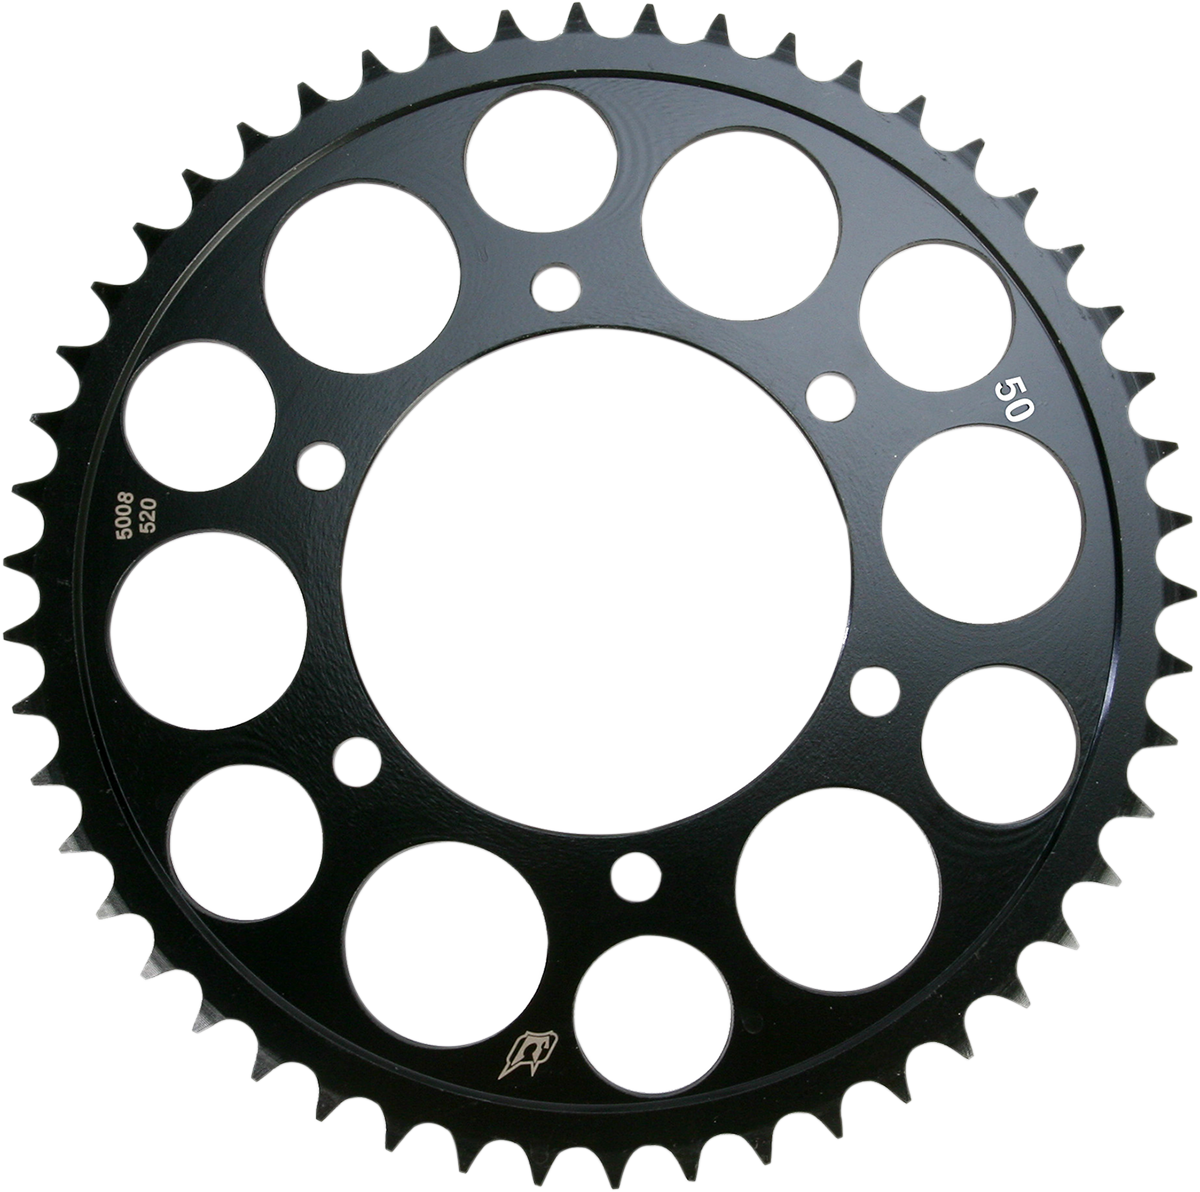 DRIVEN RACING Rear Sprocket - 50 Tooth 5008-520-50T